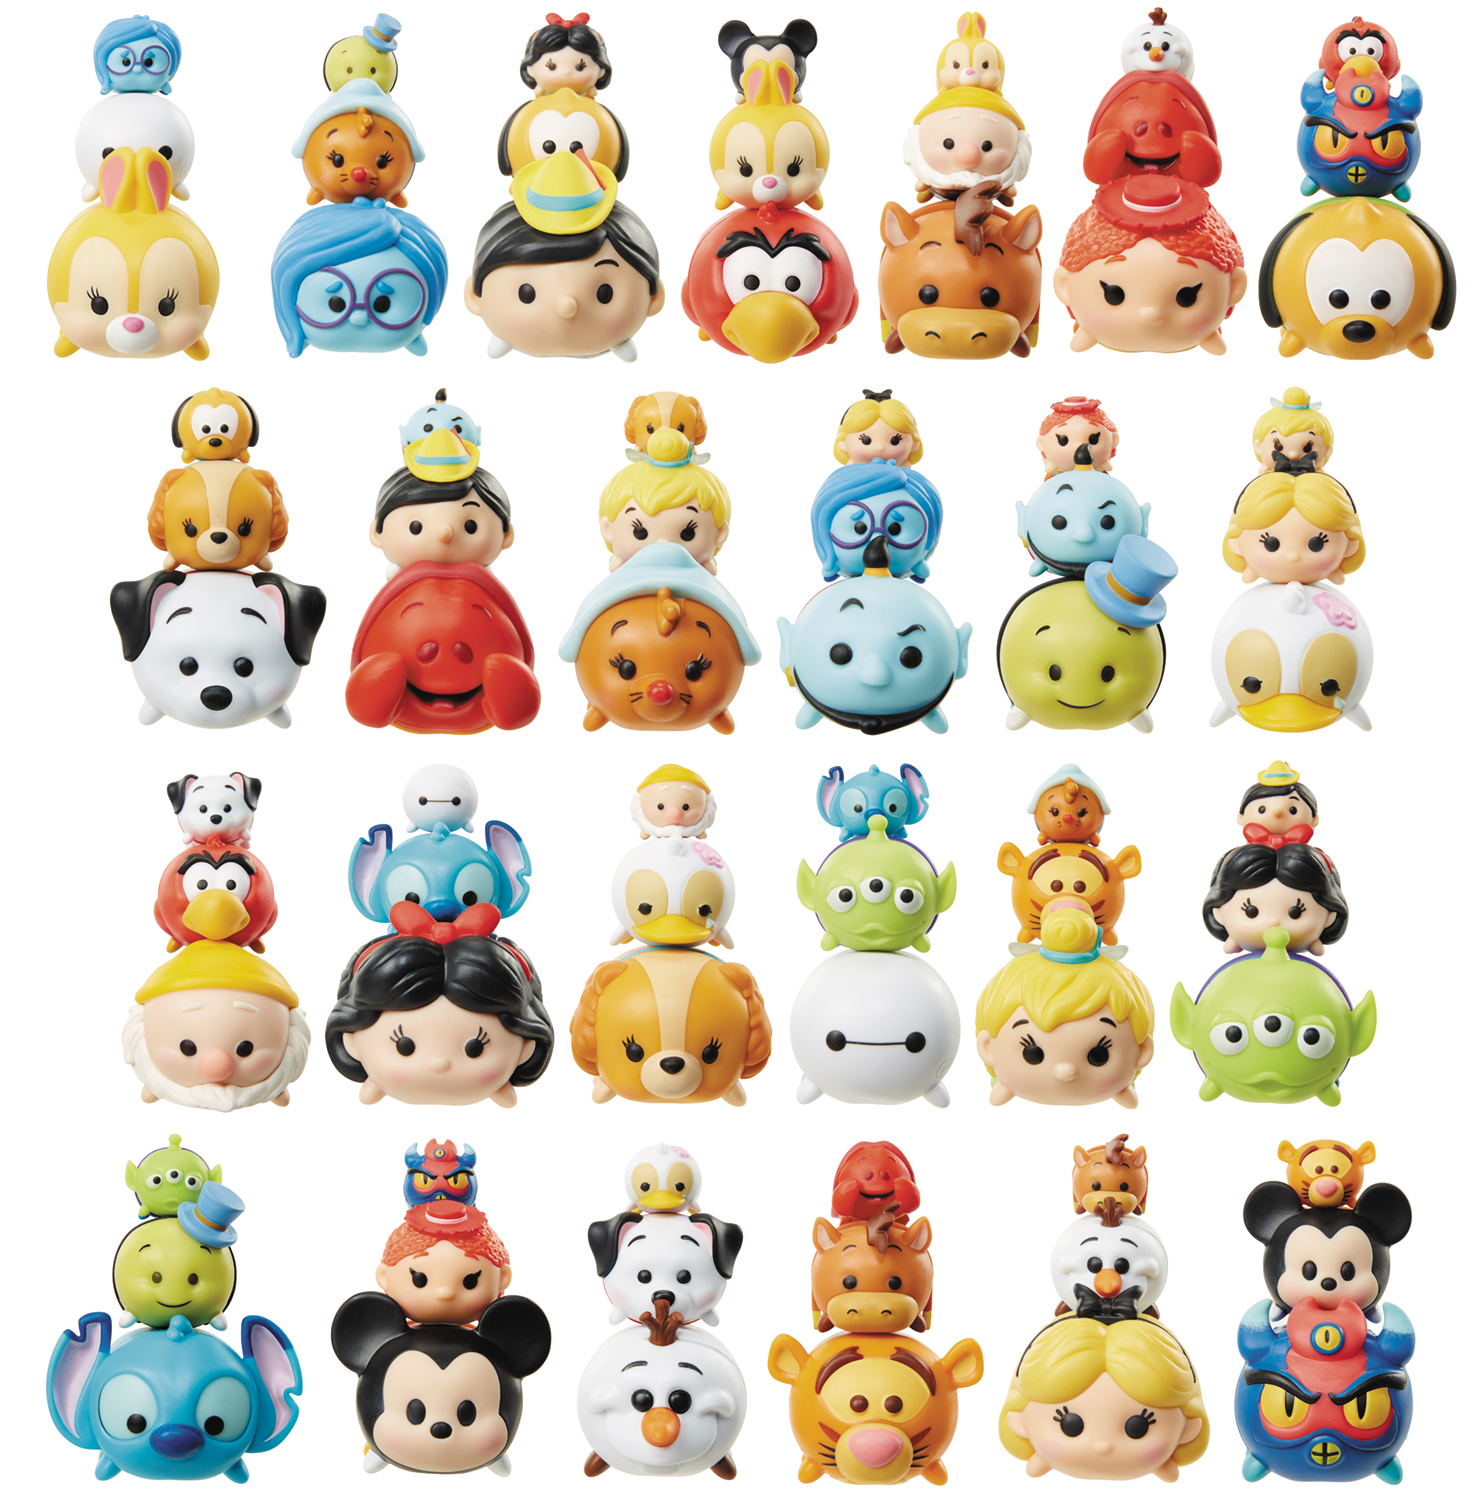 Tsum Tsum 3-Pack Figures: Chip/Olaf/Mickey